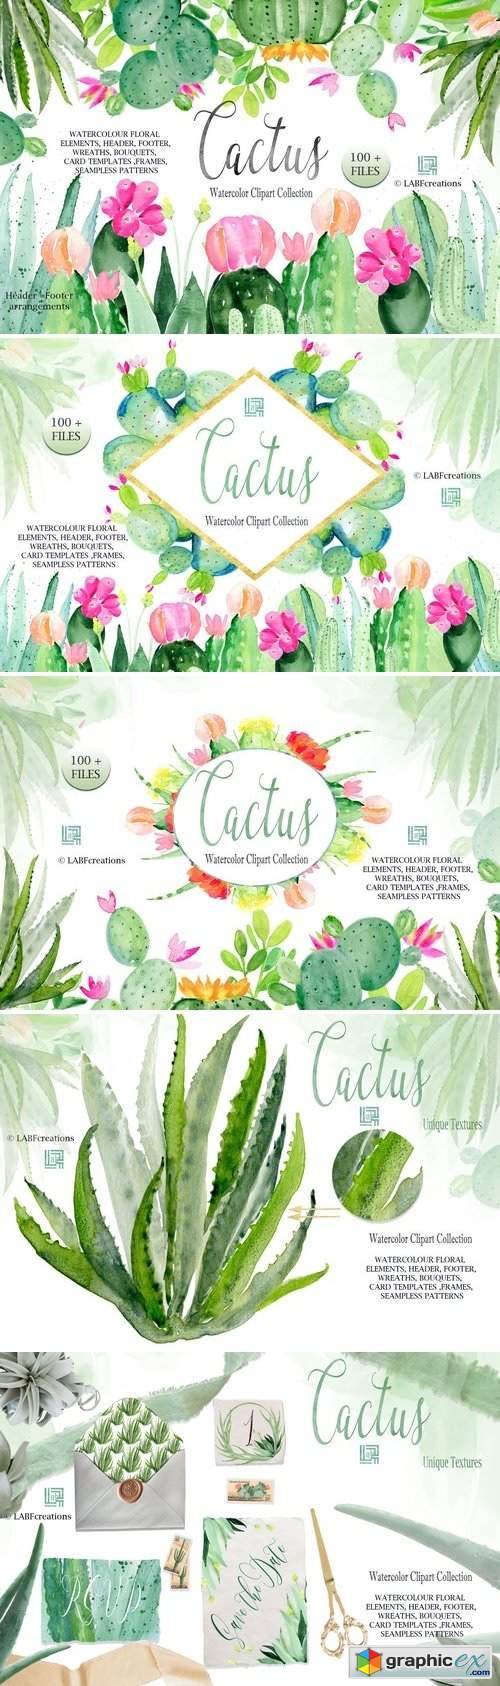 Cactus watercolr clipart collection